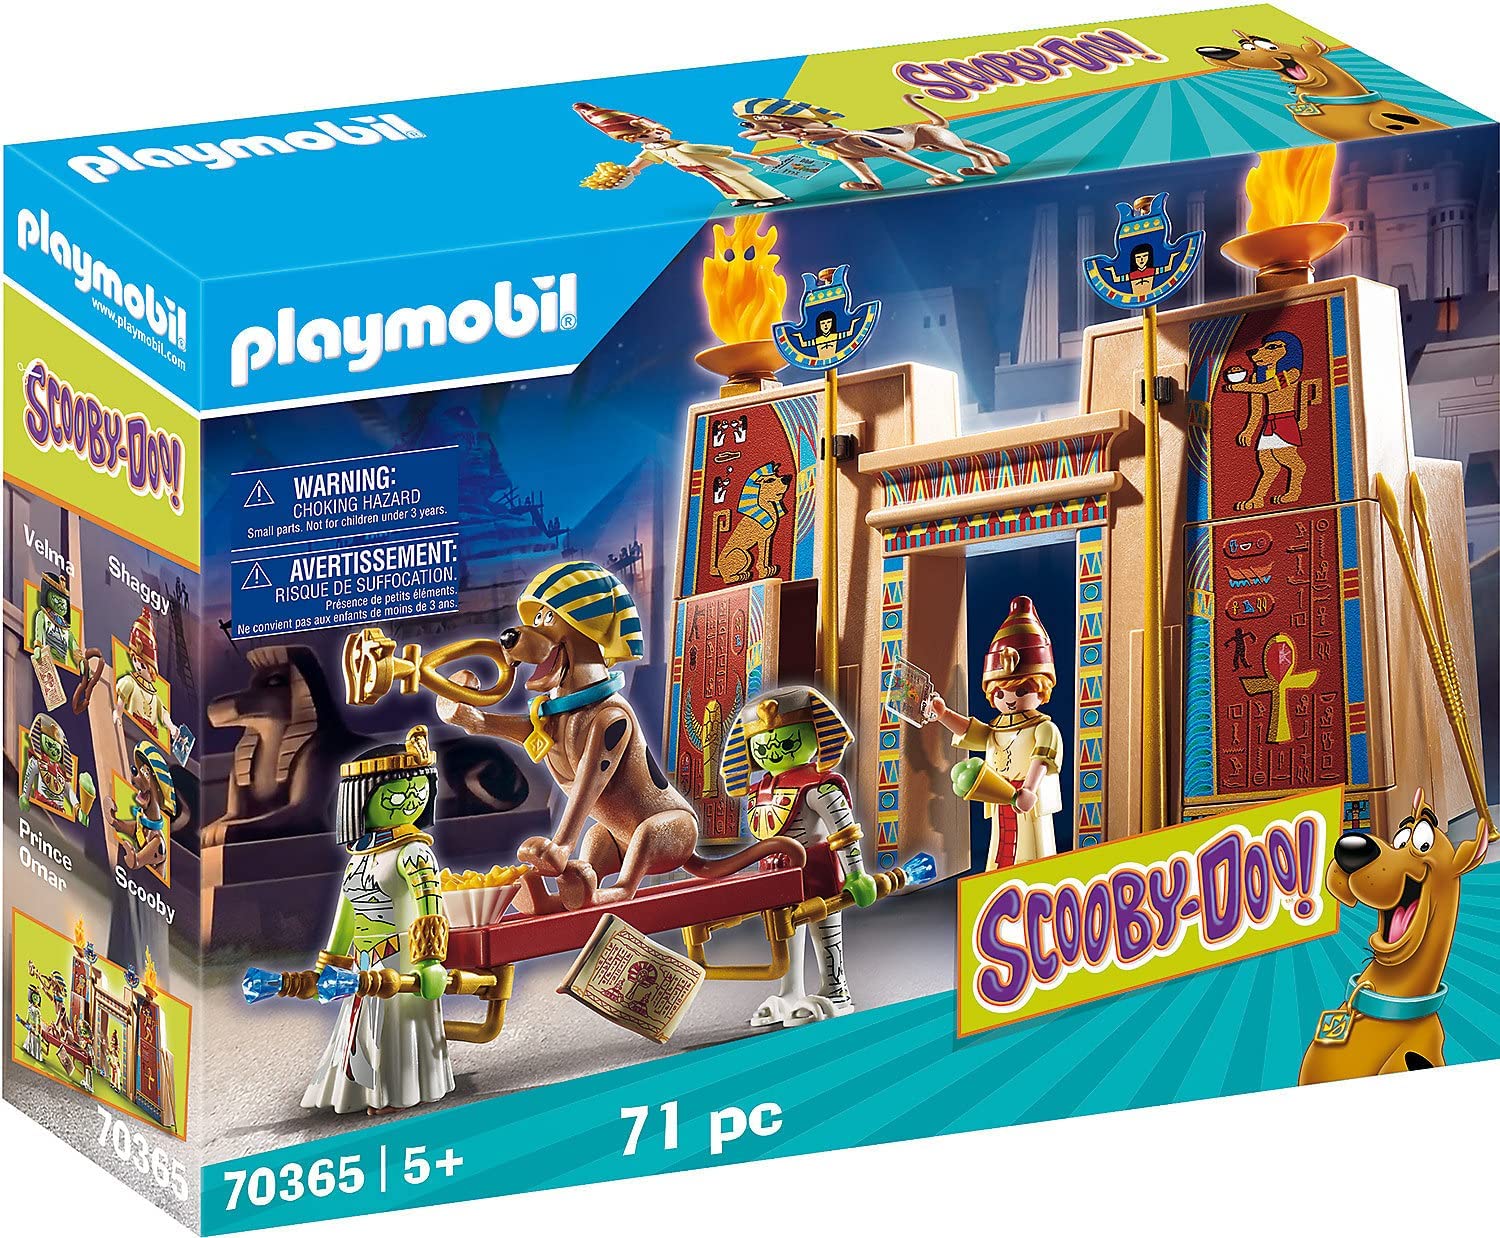 Scooby-Doo, Where Are You? A Playmobil Review